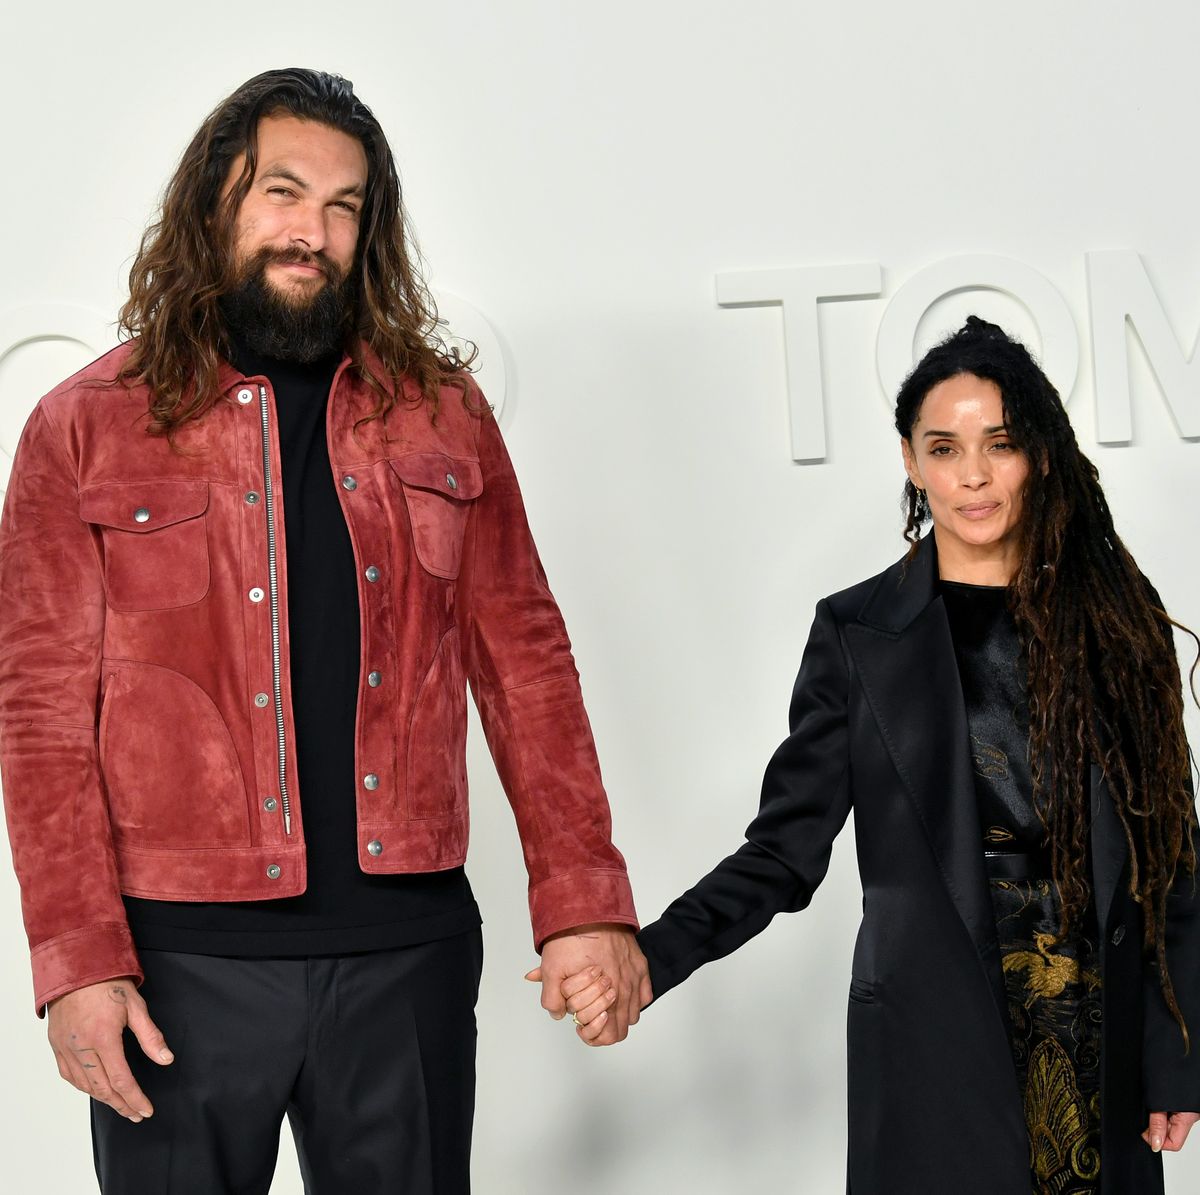 hollywood, california   february 07 l r jason momoa and lisa bonet attend the tom ford aw20 show at milk studios on february 07, 2020 in hollywood, california photo by amy sussmangetty images